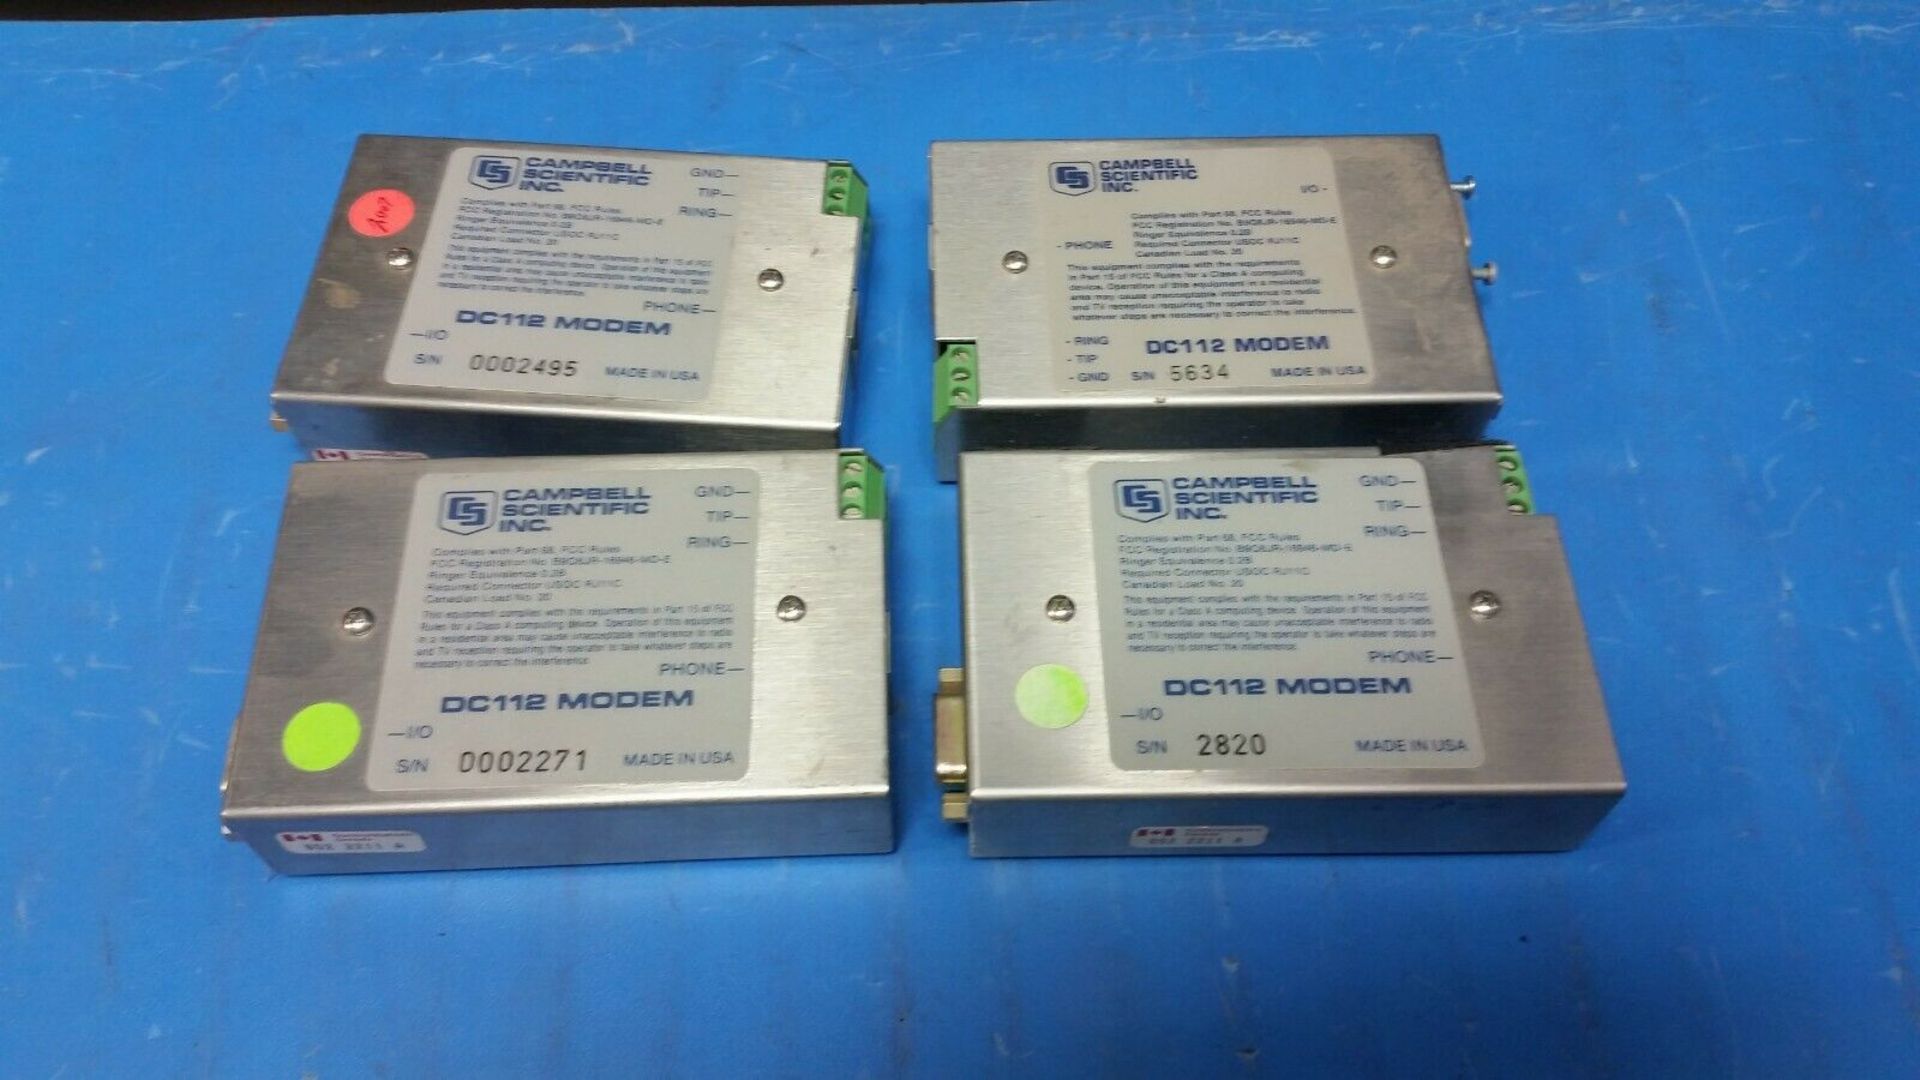 LOT OF 4 CAMPBELL SCIENTIFIC MODEMS